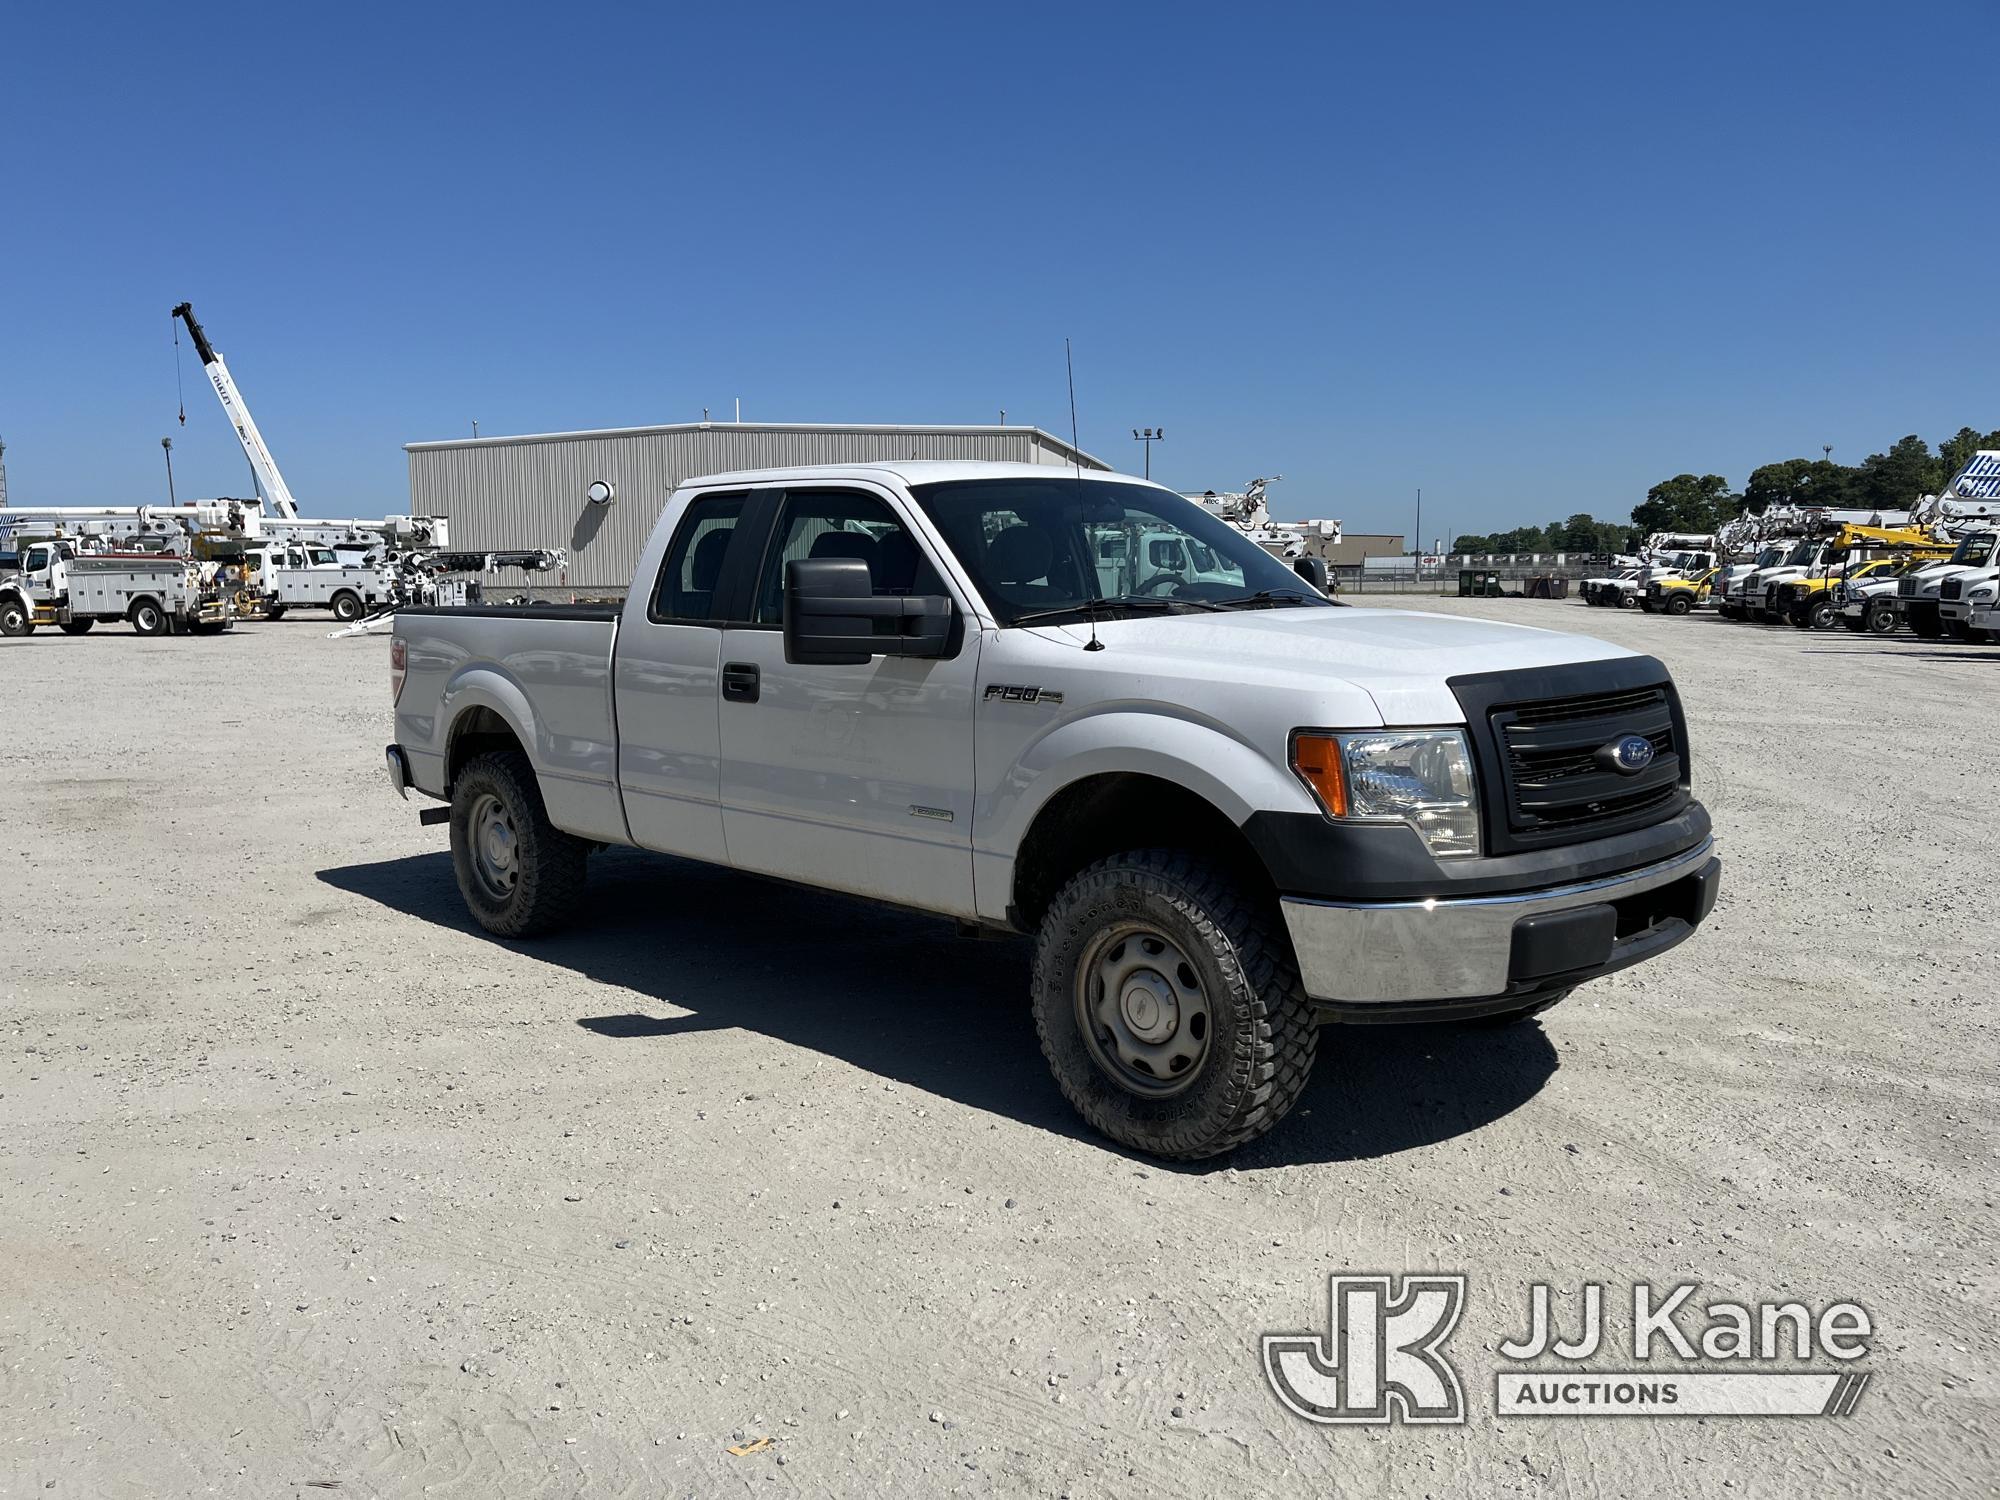 (Chester, VA) 2014 Ford F150 4x4 Extended-Cab Pickup Truck Runs & Moves